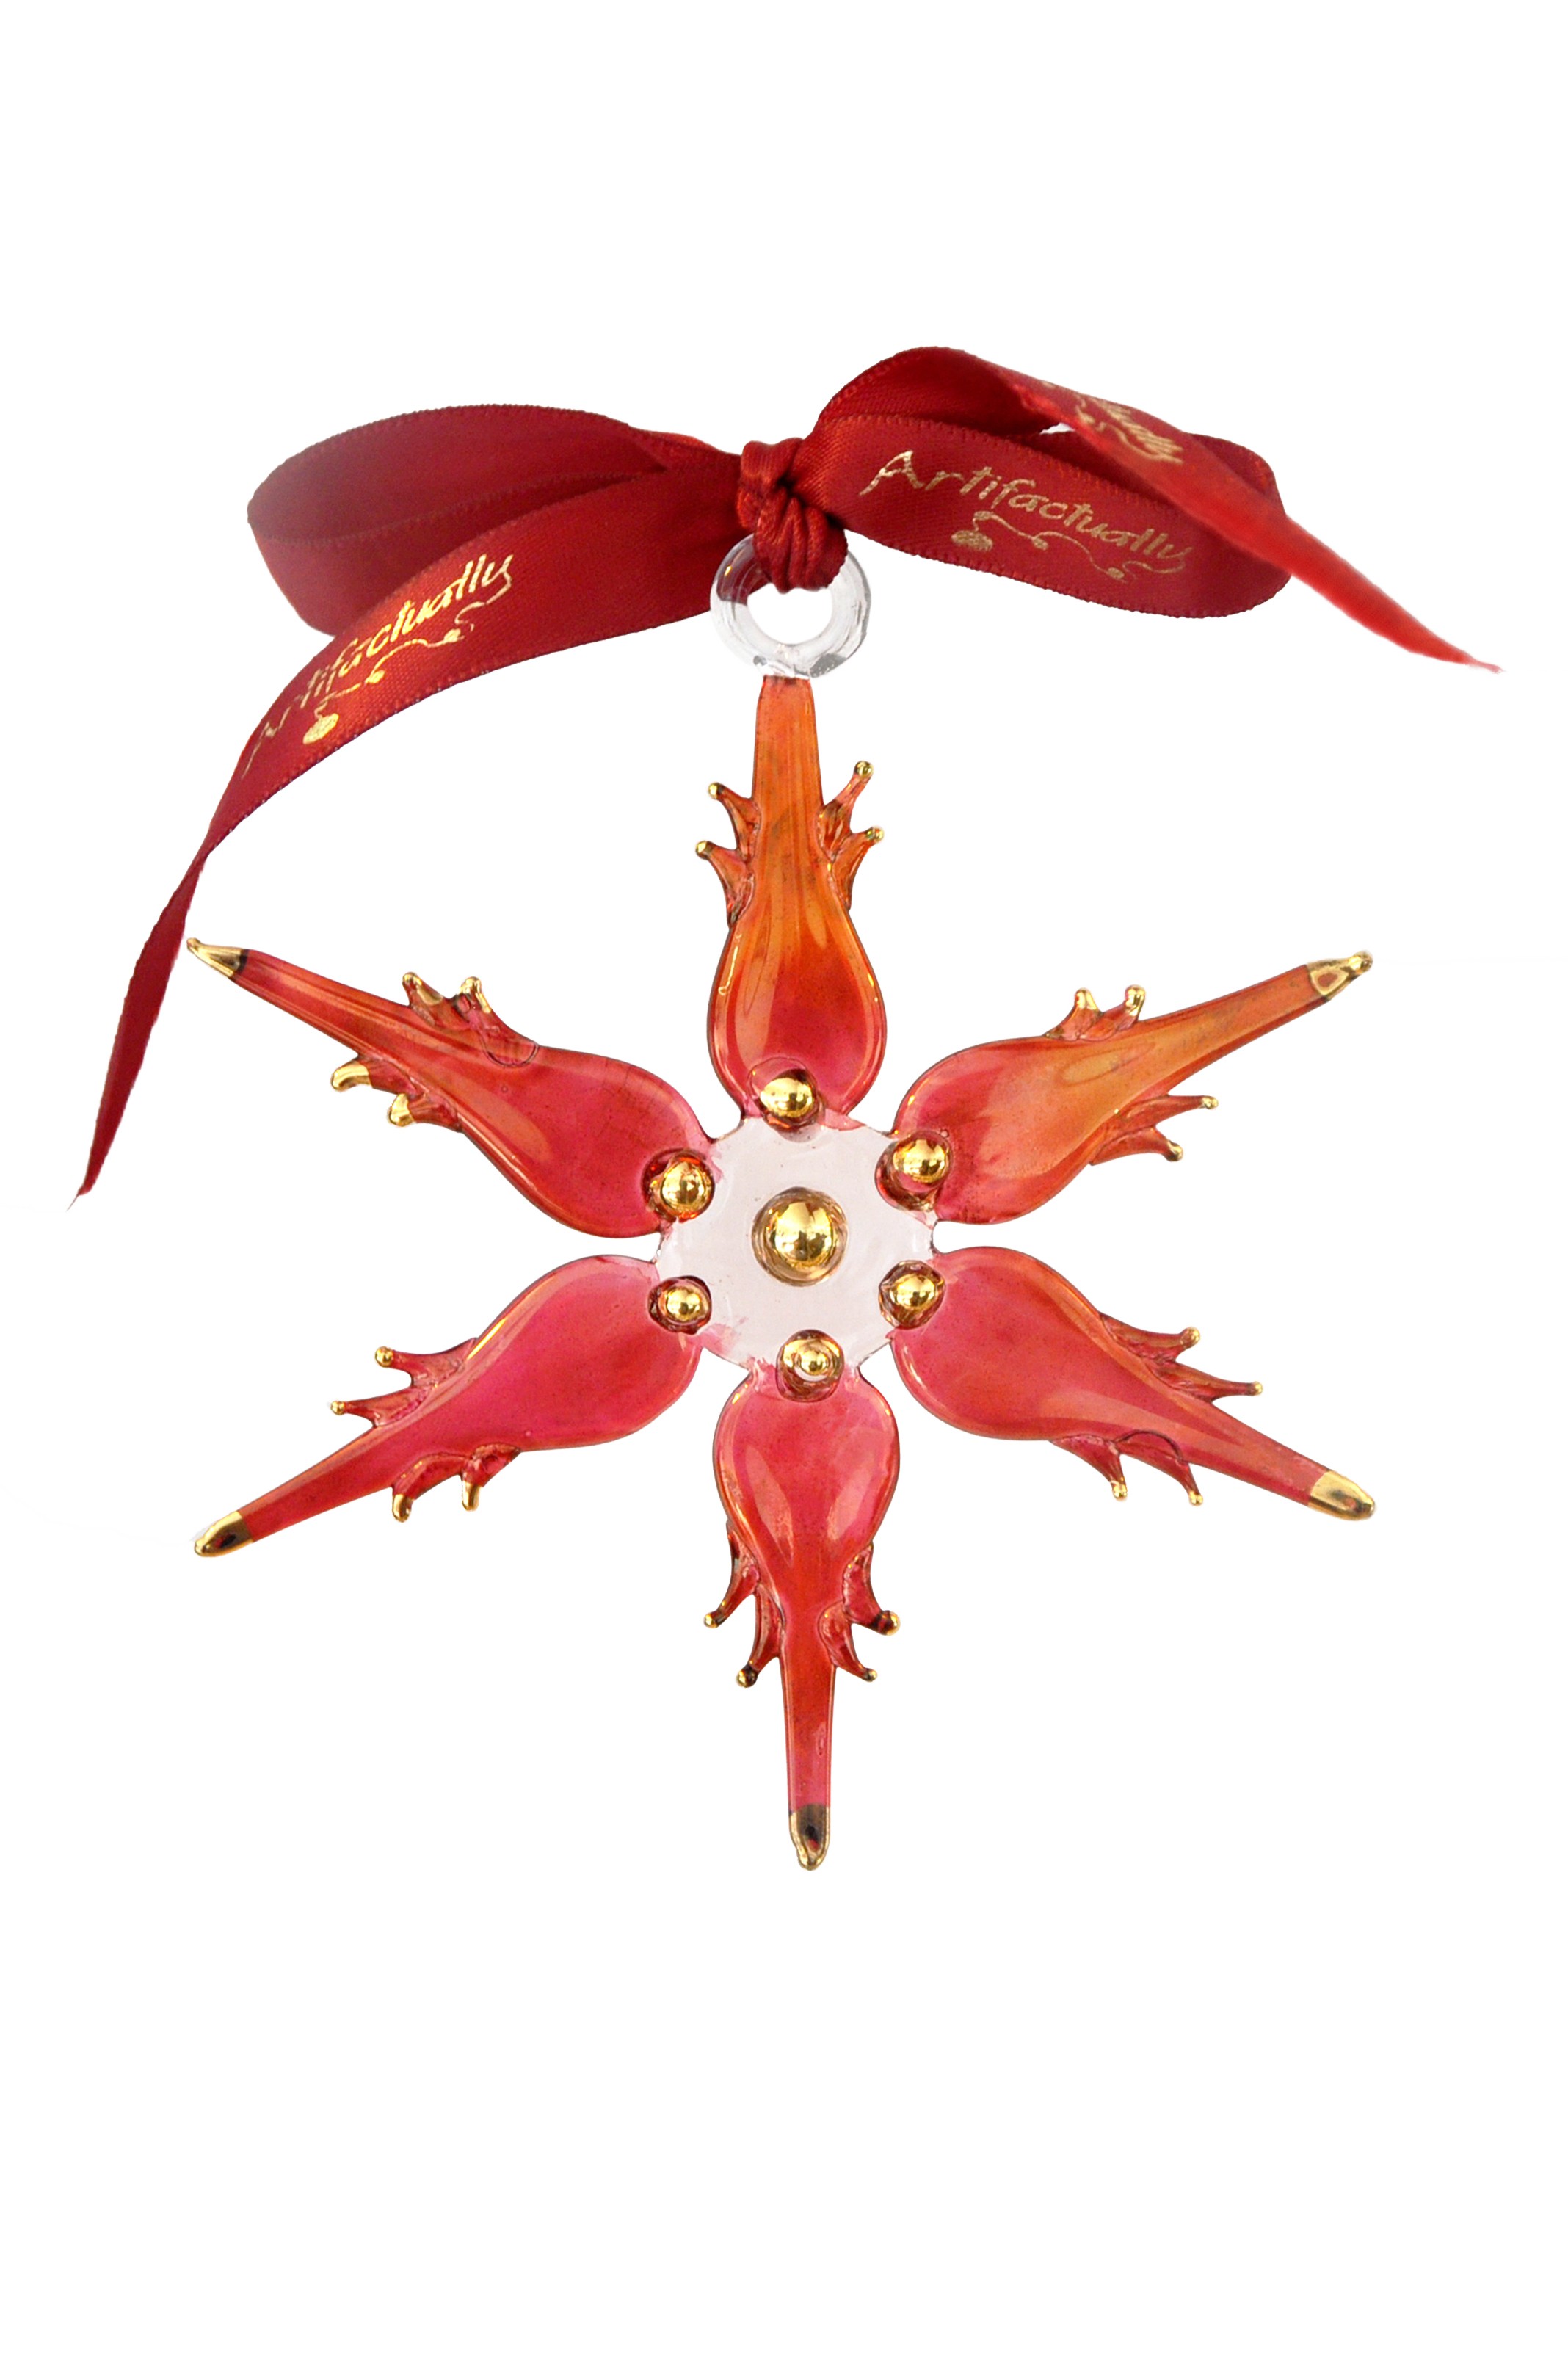 Hand blown glass novelty frilly star ornament